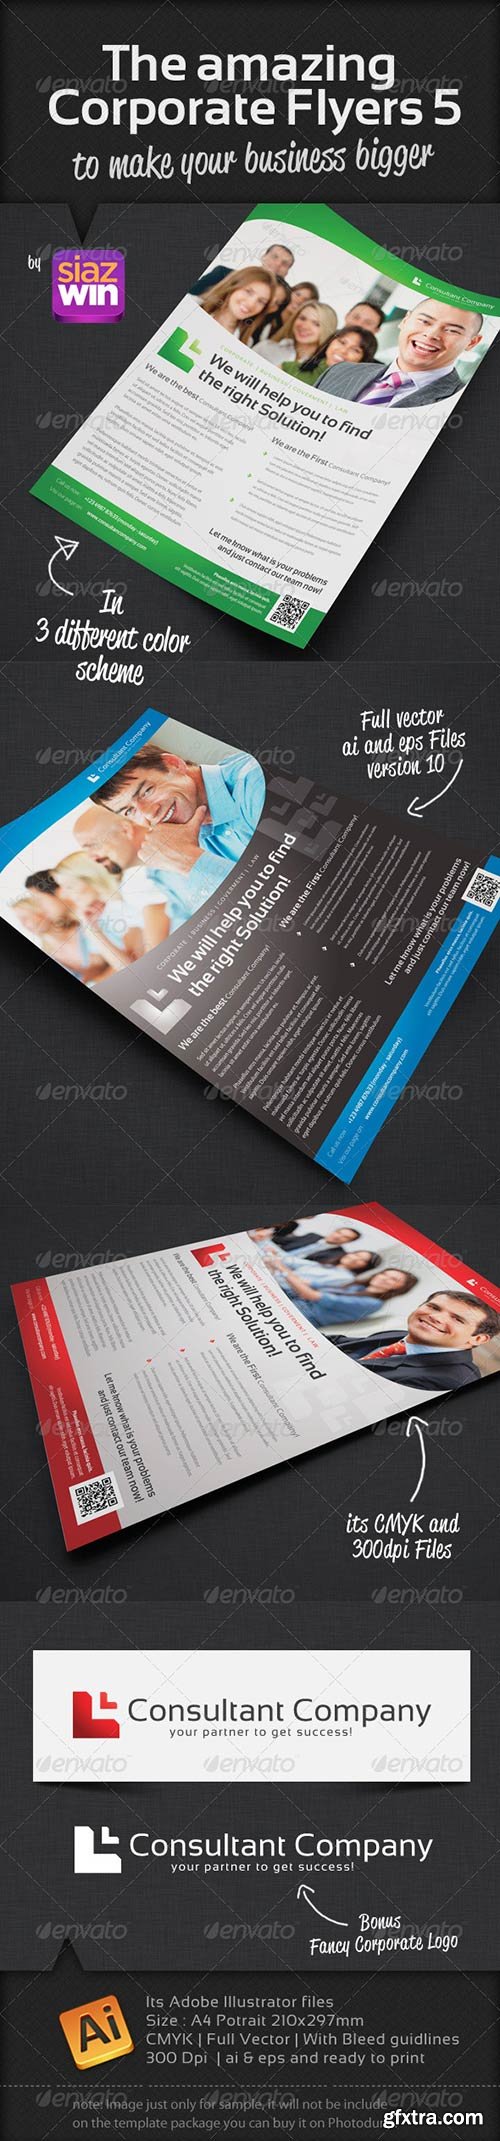 GraphicRiver - The Amazing Corporate Flyers 5